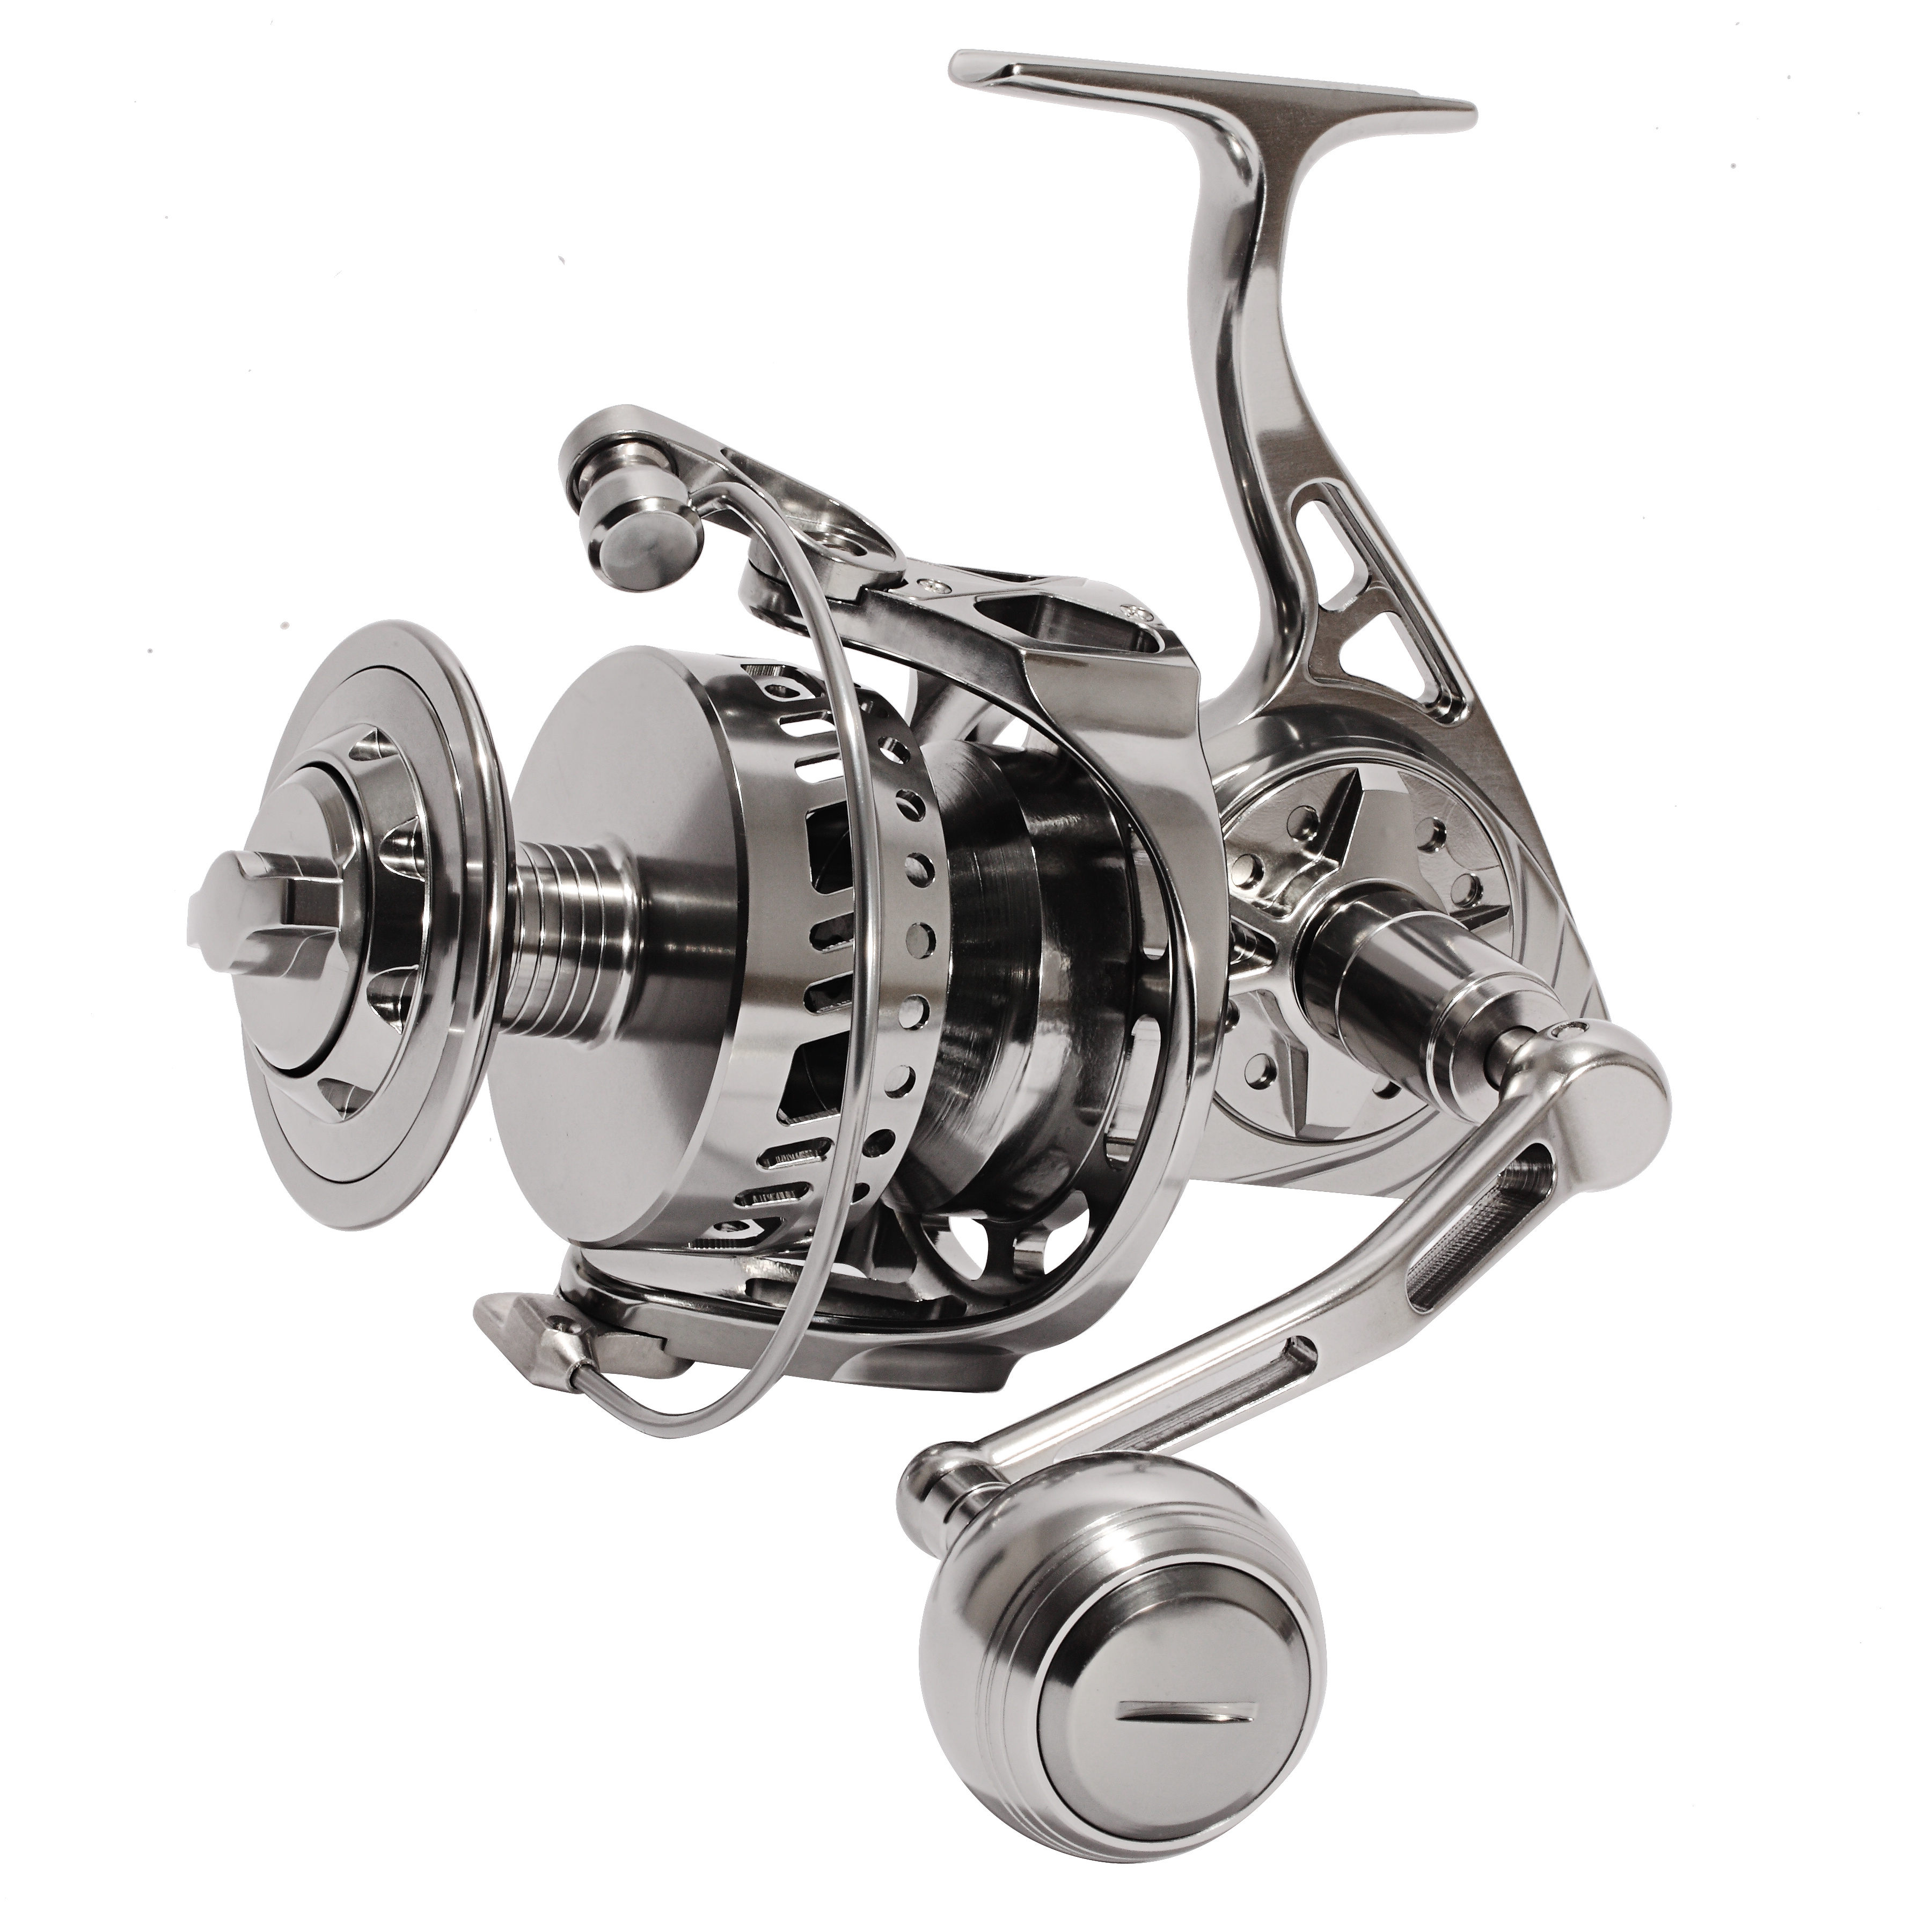 77lb/35kg Drag Power: Premium Quality Full Metal Saltwater Spinning Fishing  Reel for Big Game Boat Offshore Surf Deep Sea Fishing - Size 7000